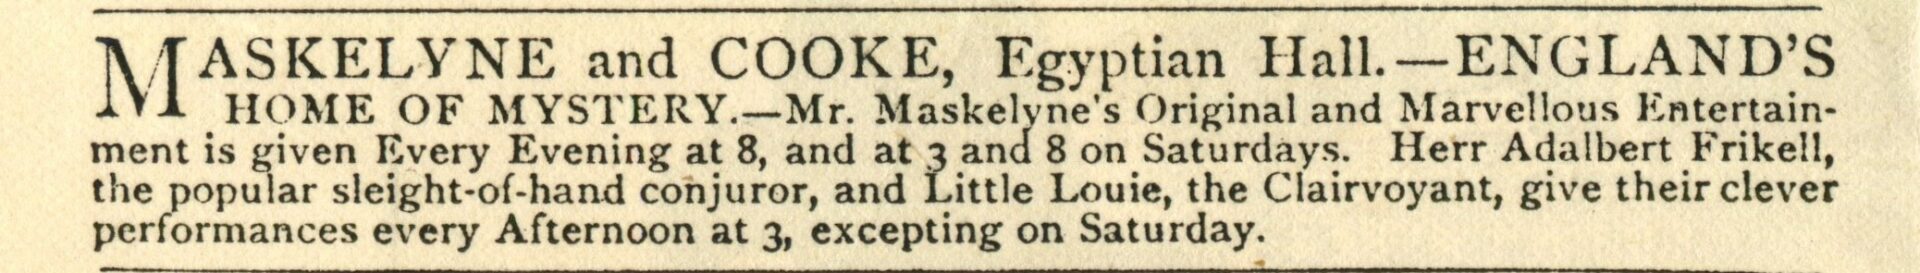 Advertisement for Maskelyne and Cooke and Adalbert Frikell at the Egyptian Hall, 1880